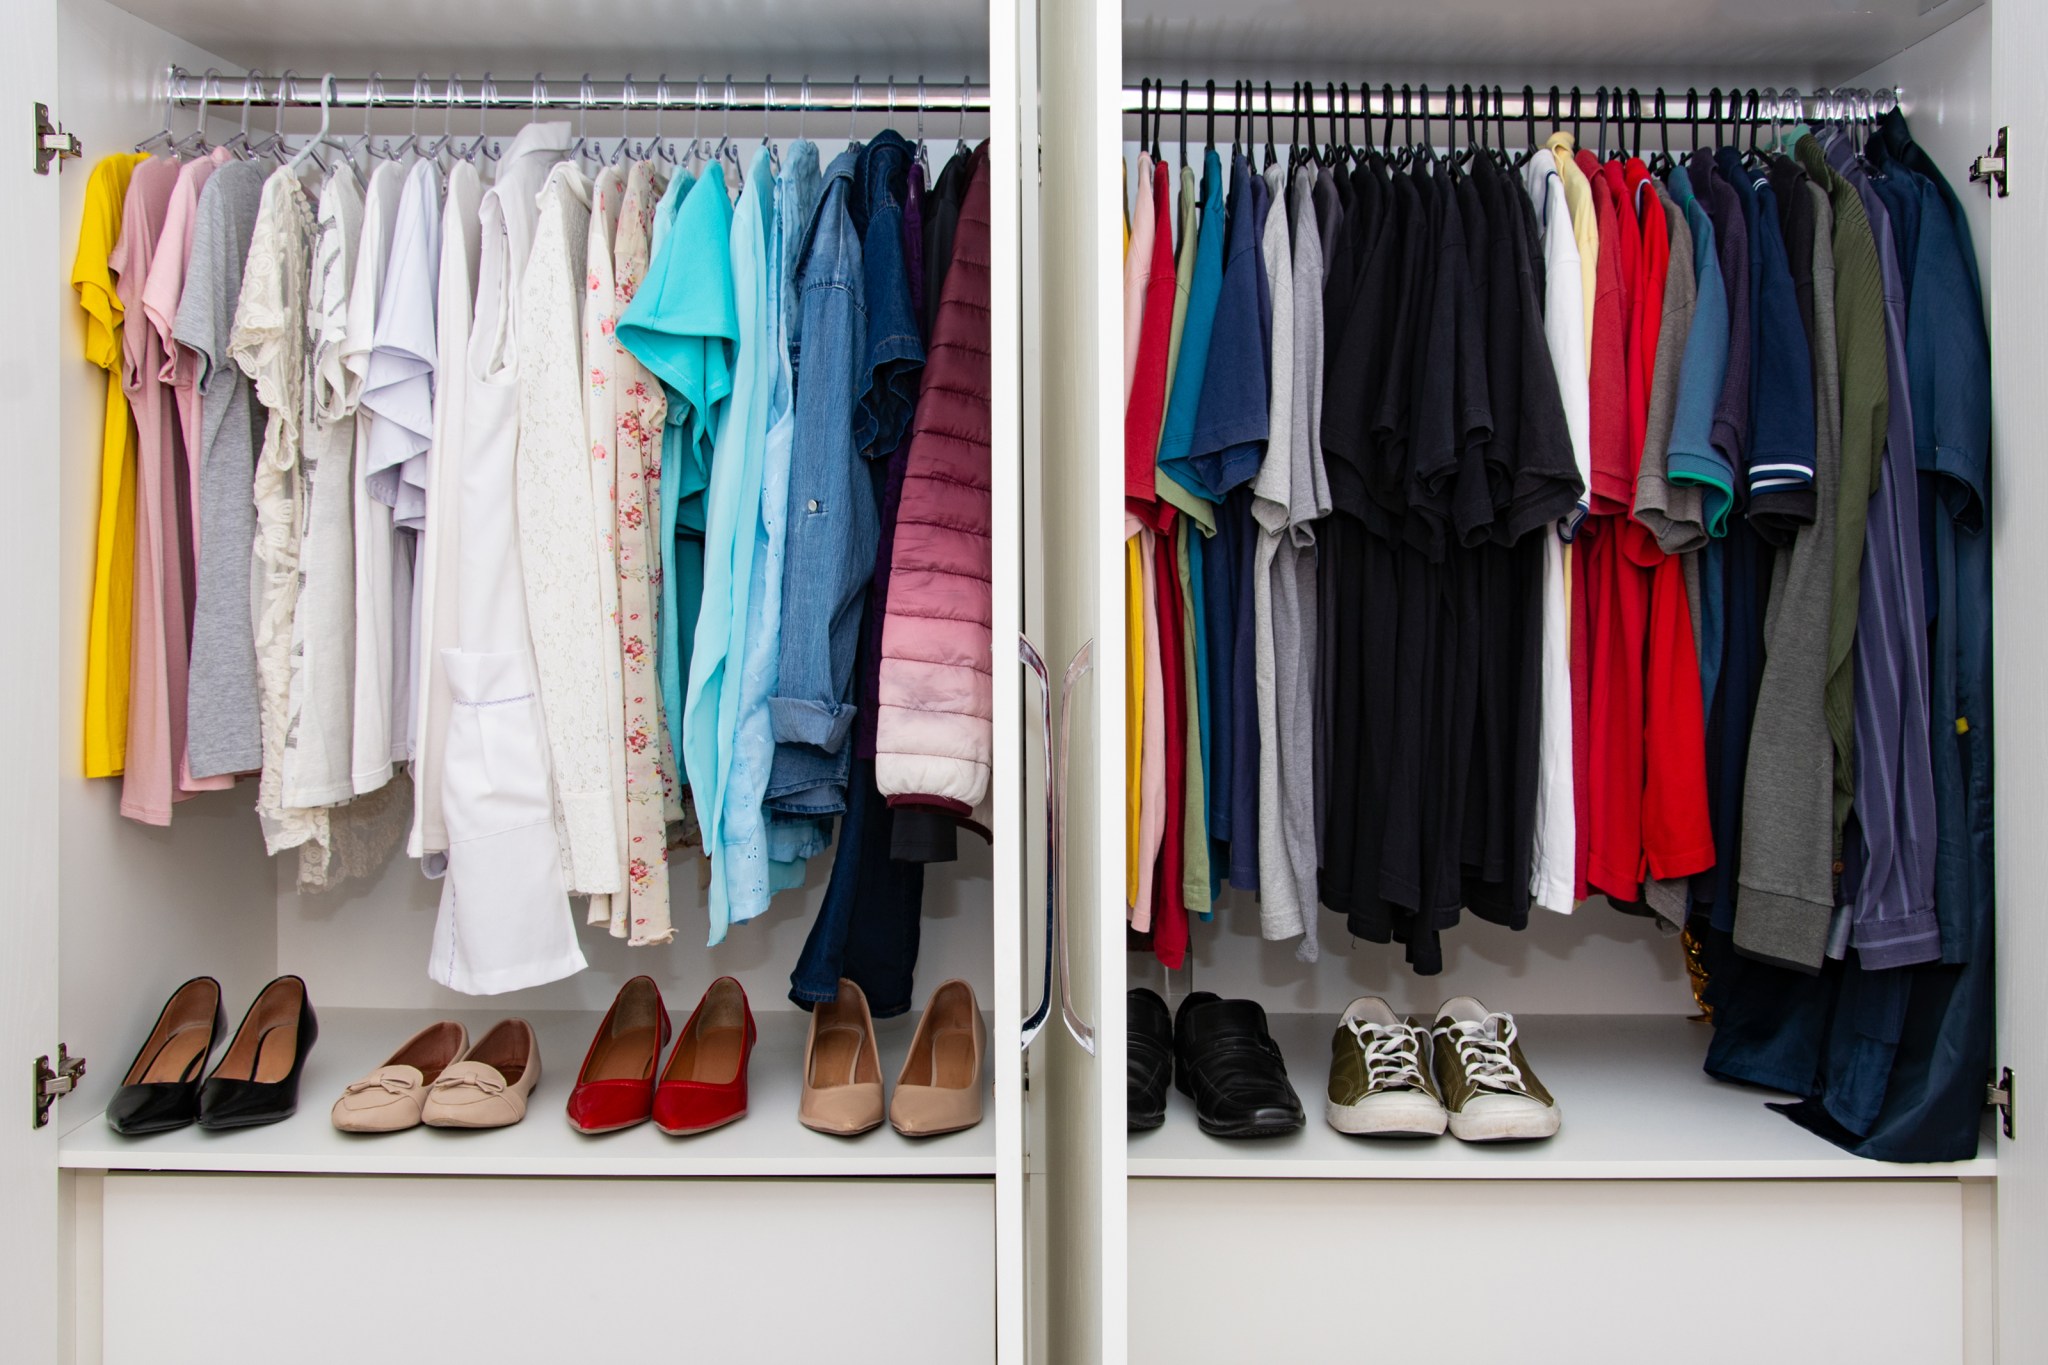 A custom built closet for a married couple with color organized clothing.